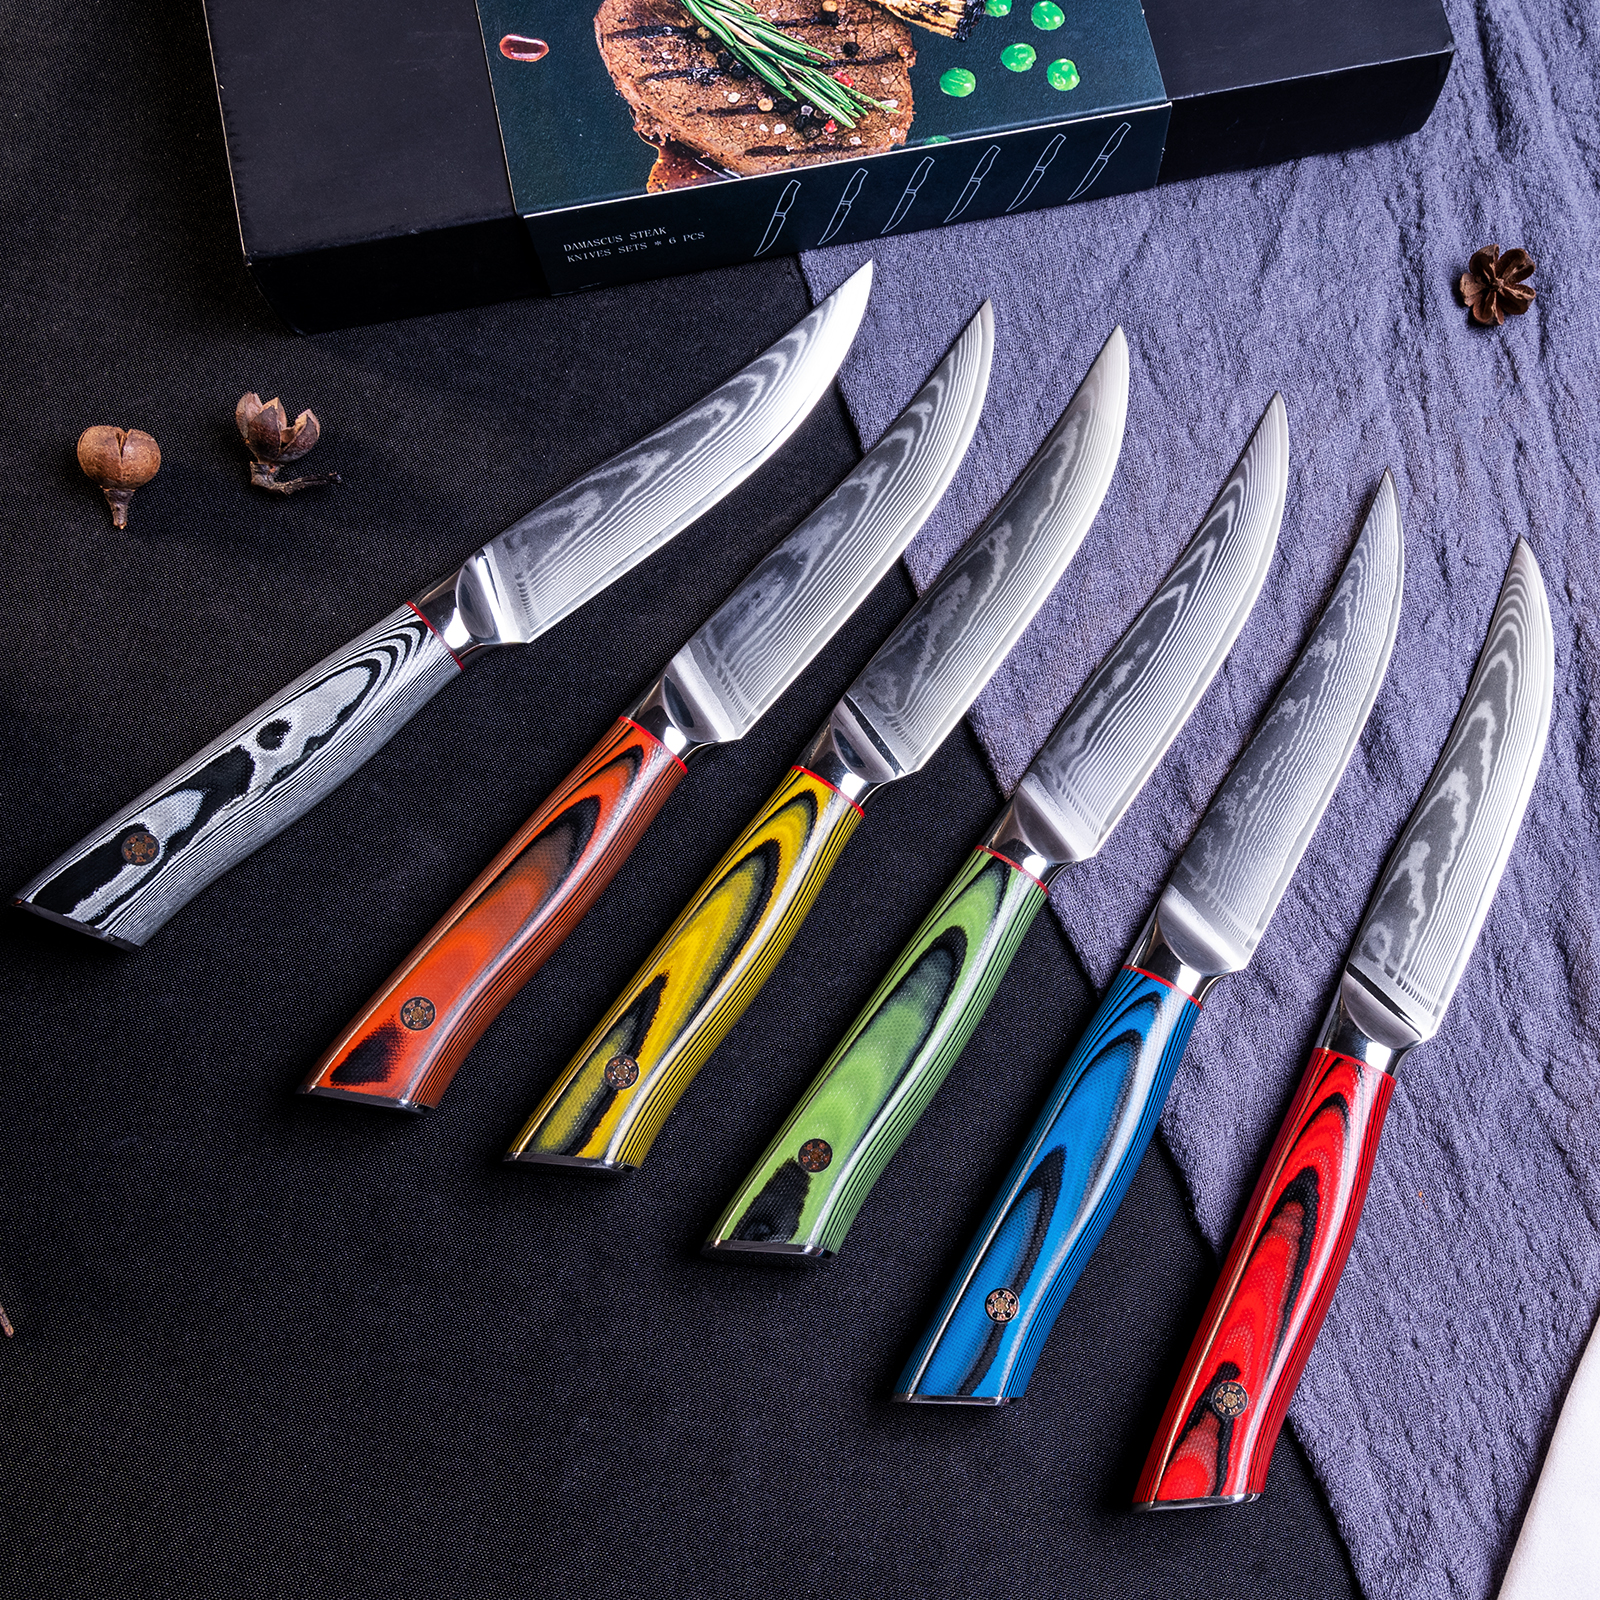 Where To Buy Good Kitchen Knives? Kitchen Knife Set Online Shopping. - Best  Damascus Chef's Knives